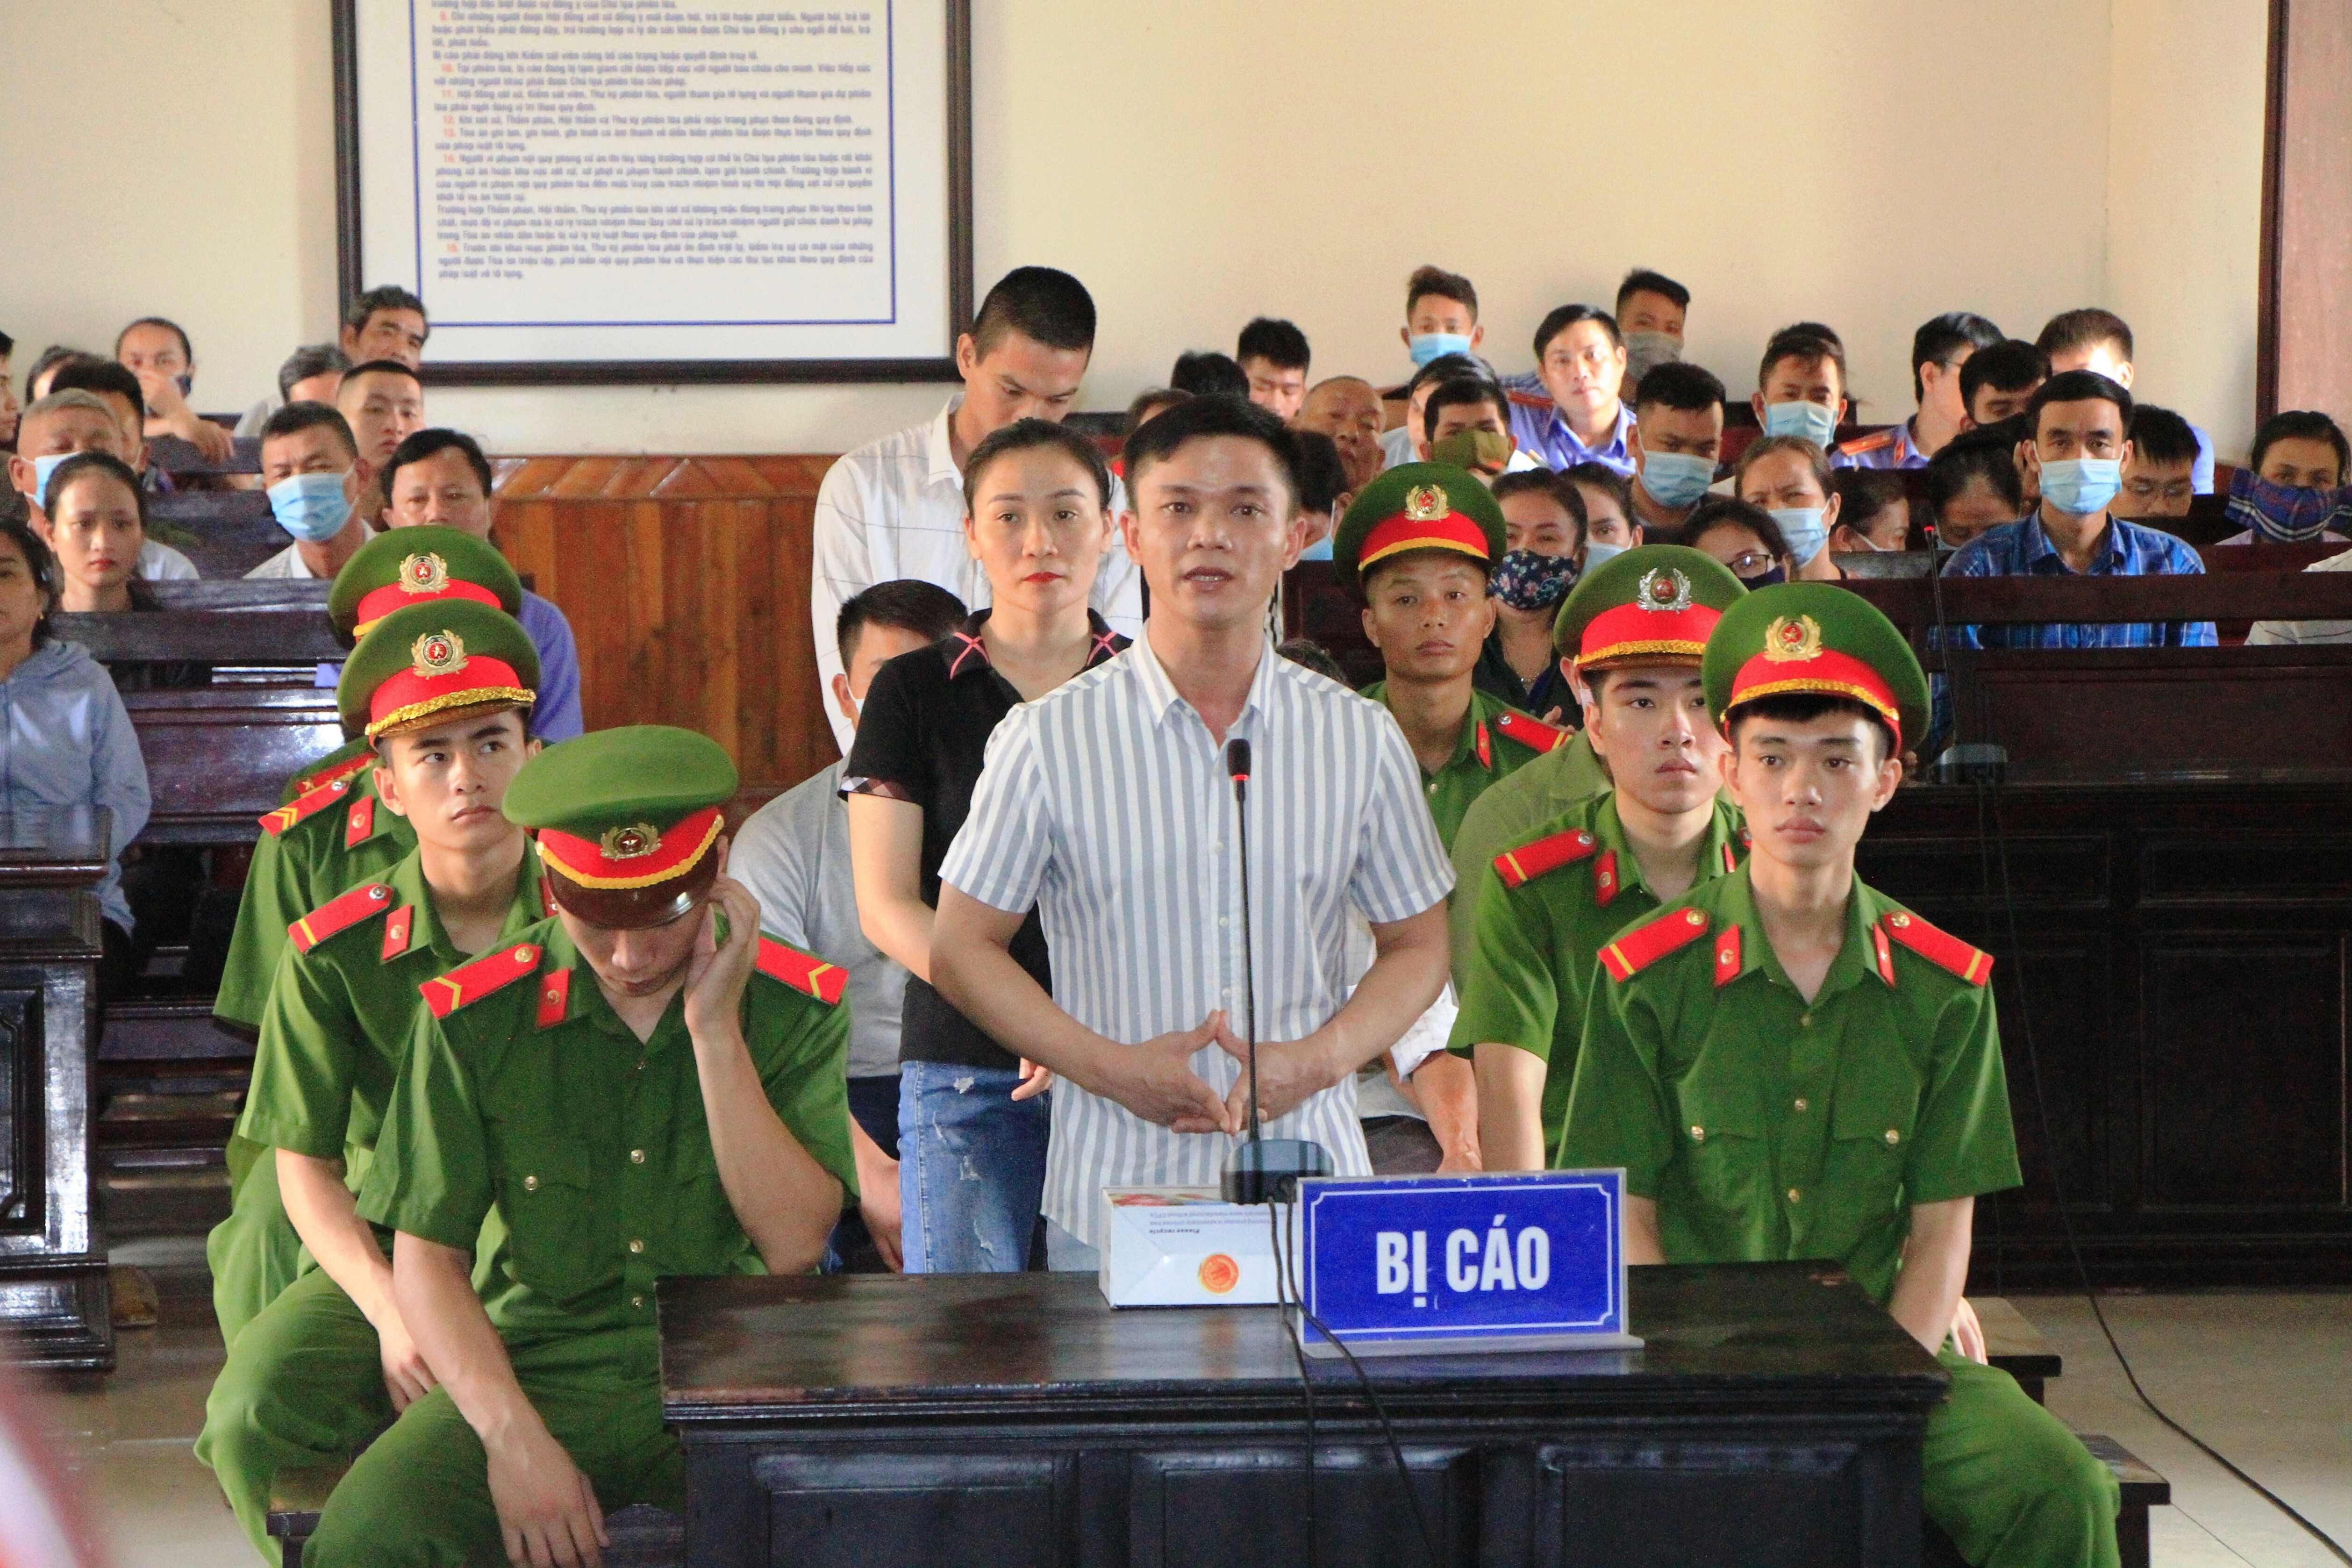 Defendants are seen during a trial in Ha Tinh province against those involved in the deaths of 39 migrants found in a refrigerated truck in Britain last year. Photo: AFP